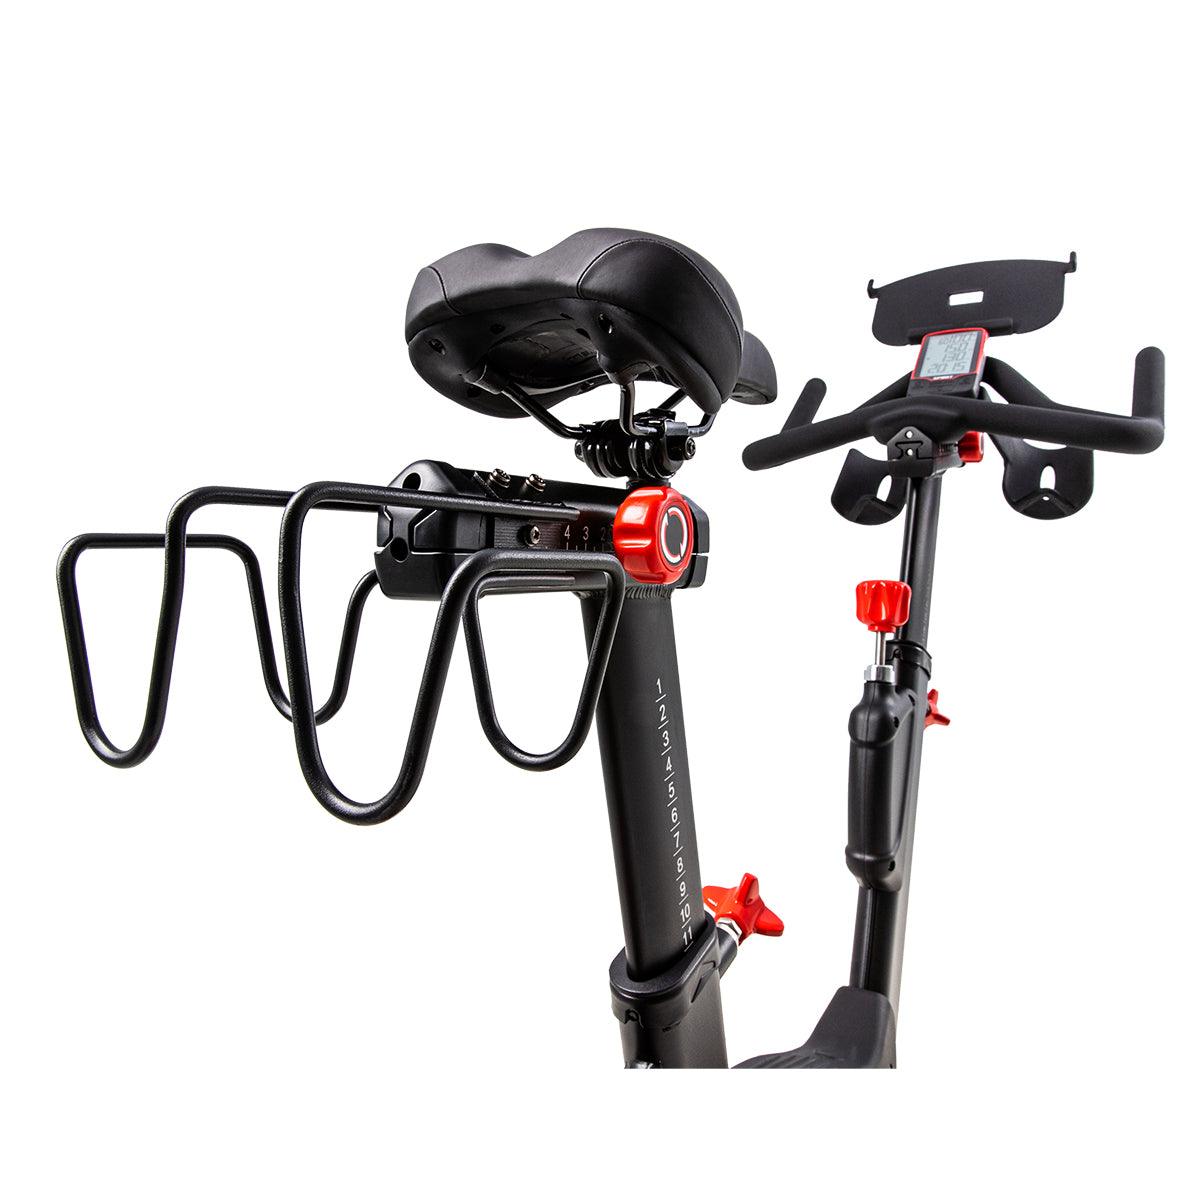 Spirit CIC850 Indoor Cycle - ExerciseUnlimited